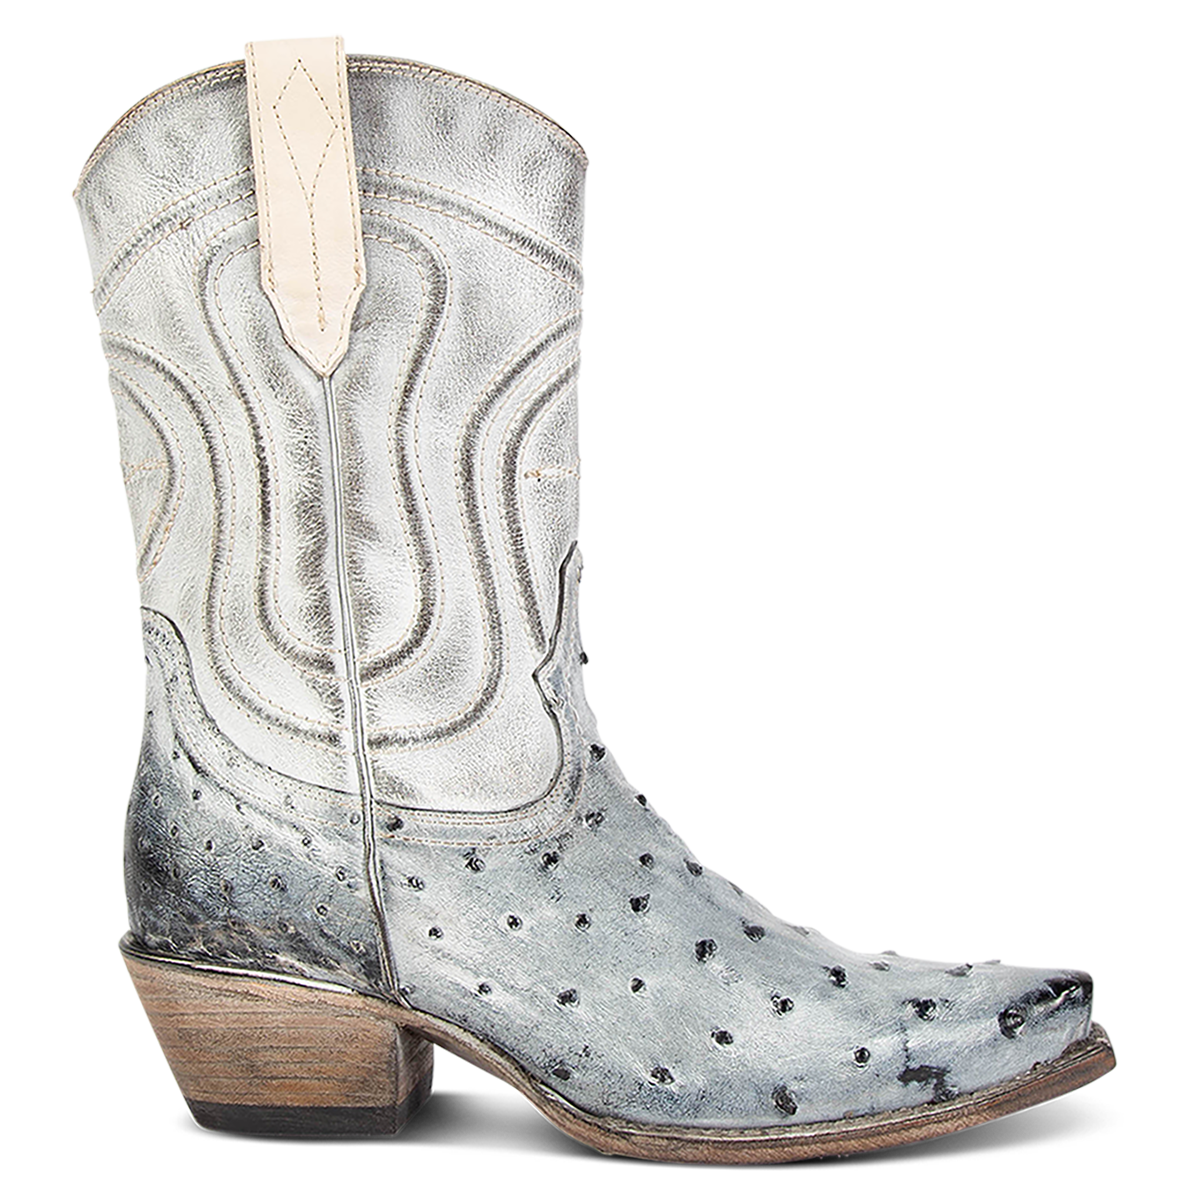 FREEBIRD women's Warrick ice ostrich multi exotic leather western cowgirl mid calf boot